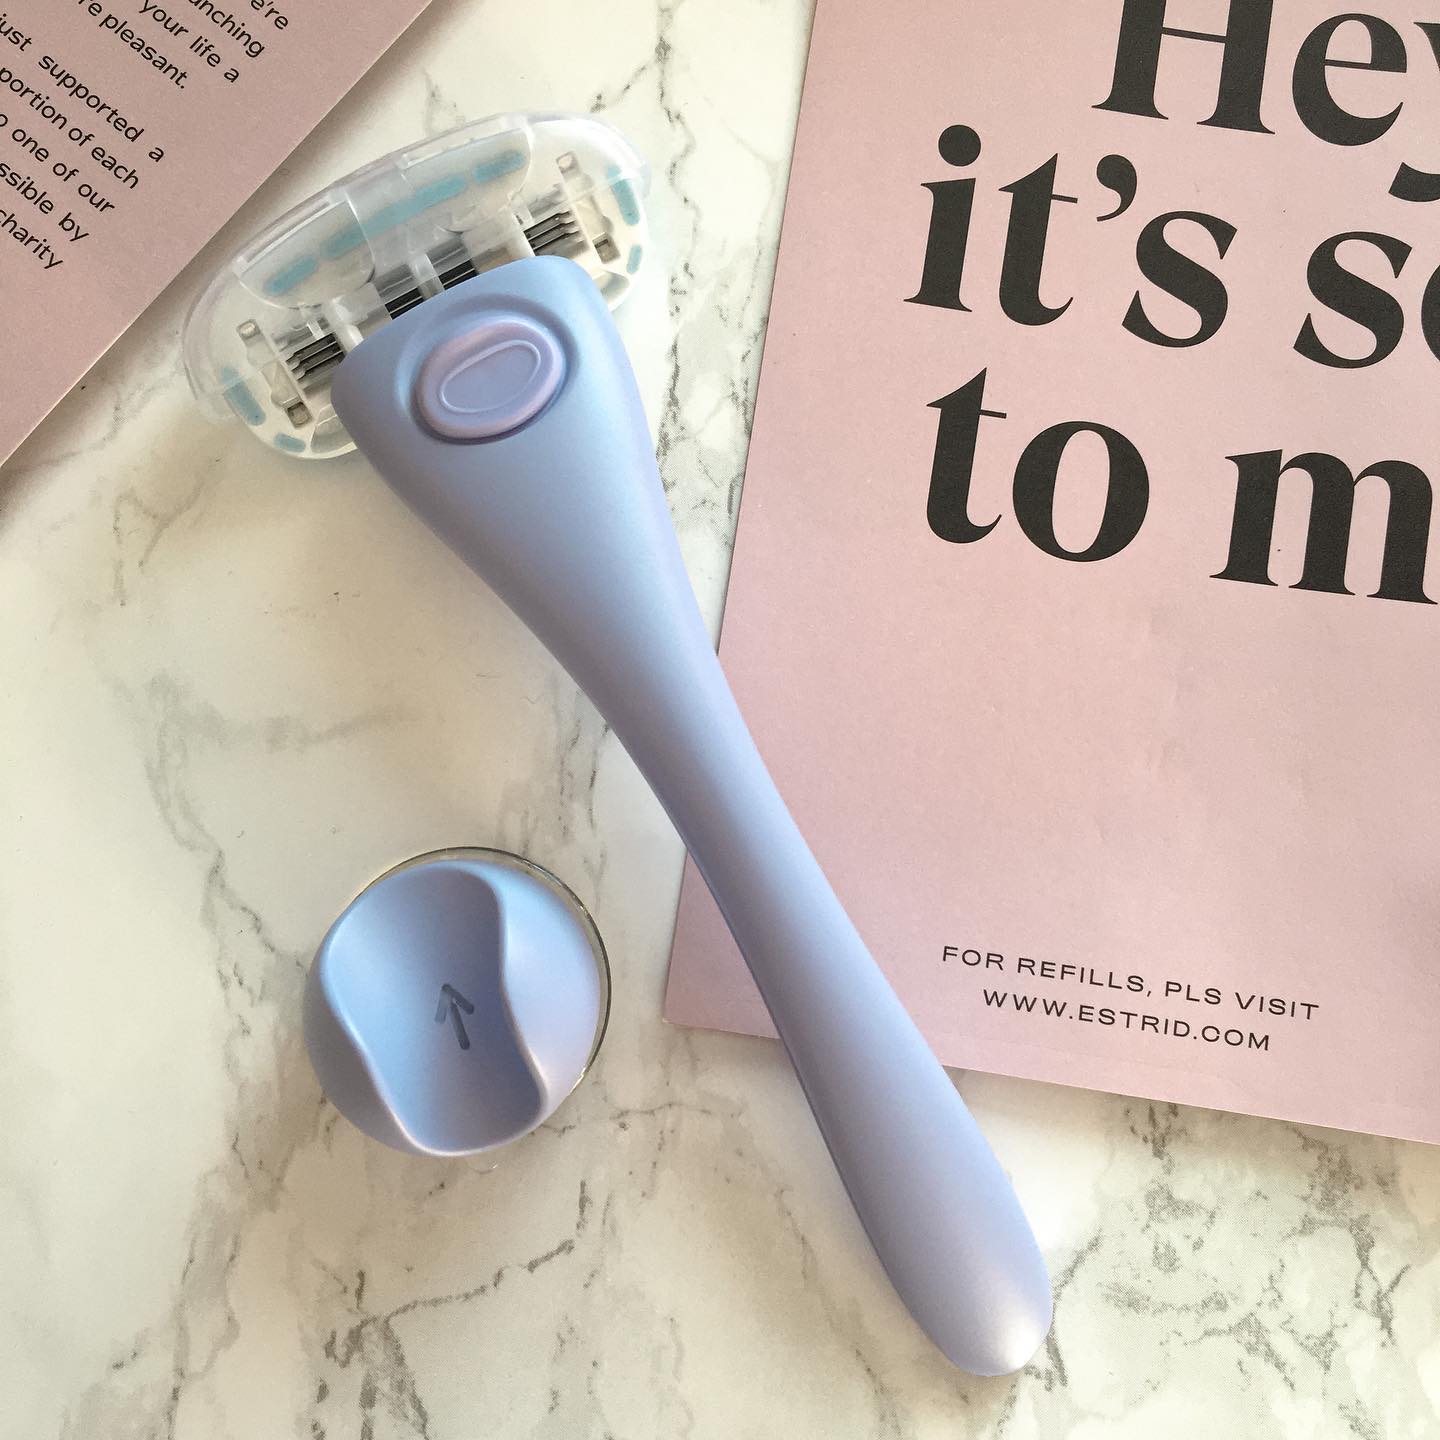 AD/PR Product but under no obligation to post | I recently posted my review of the Estrid razor on my blog 💜 
In a nut shell, the good things: ✅ 
• stainless steel handle & wall holder
• vegan & cruelty free lubricating strip
• recyclable packaging
• offset transport carbon emissions 
The not so good things: ❌
• no recycling scheme for the razor or plastic case that contain the razor heads 
But I think it is coming, so overall 3.5-4⭐️
-
#sustainability #sustainabilityblogger #ecoblogger #estridrazor #dorsetbloggers #ecolifestyle #plasticfreejuly #plasticfreejuly2022 #sustainableswap #sustainableswap #ecoswap #estridreview